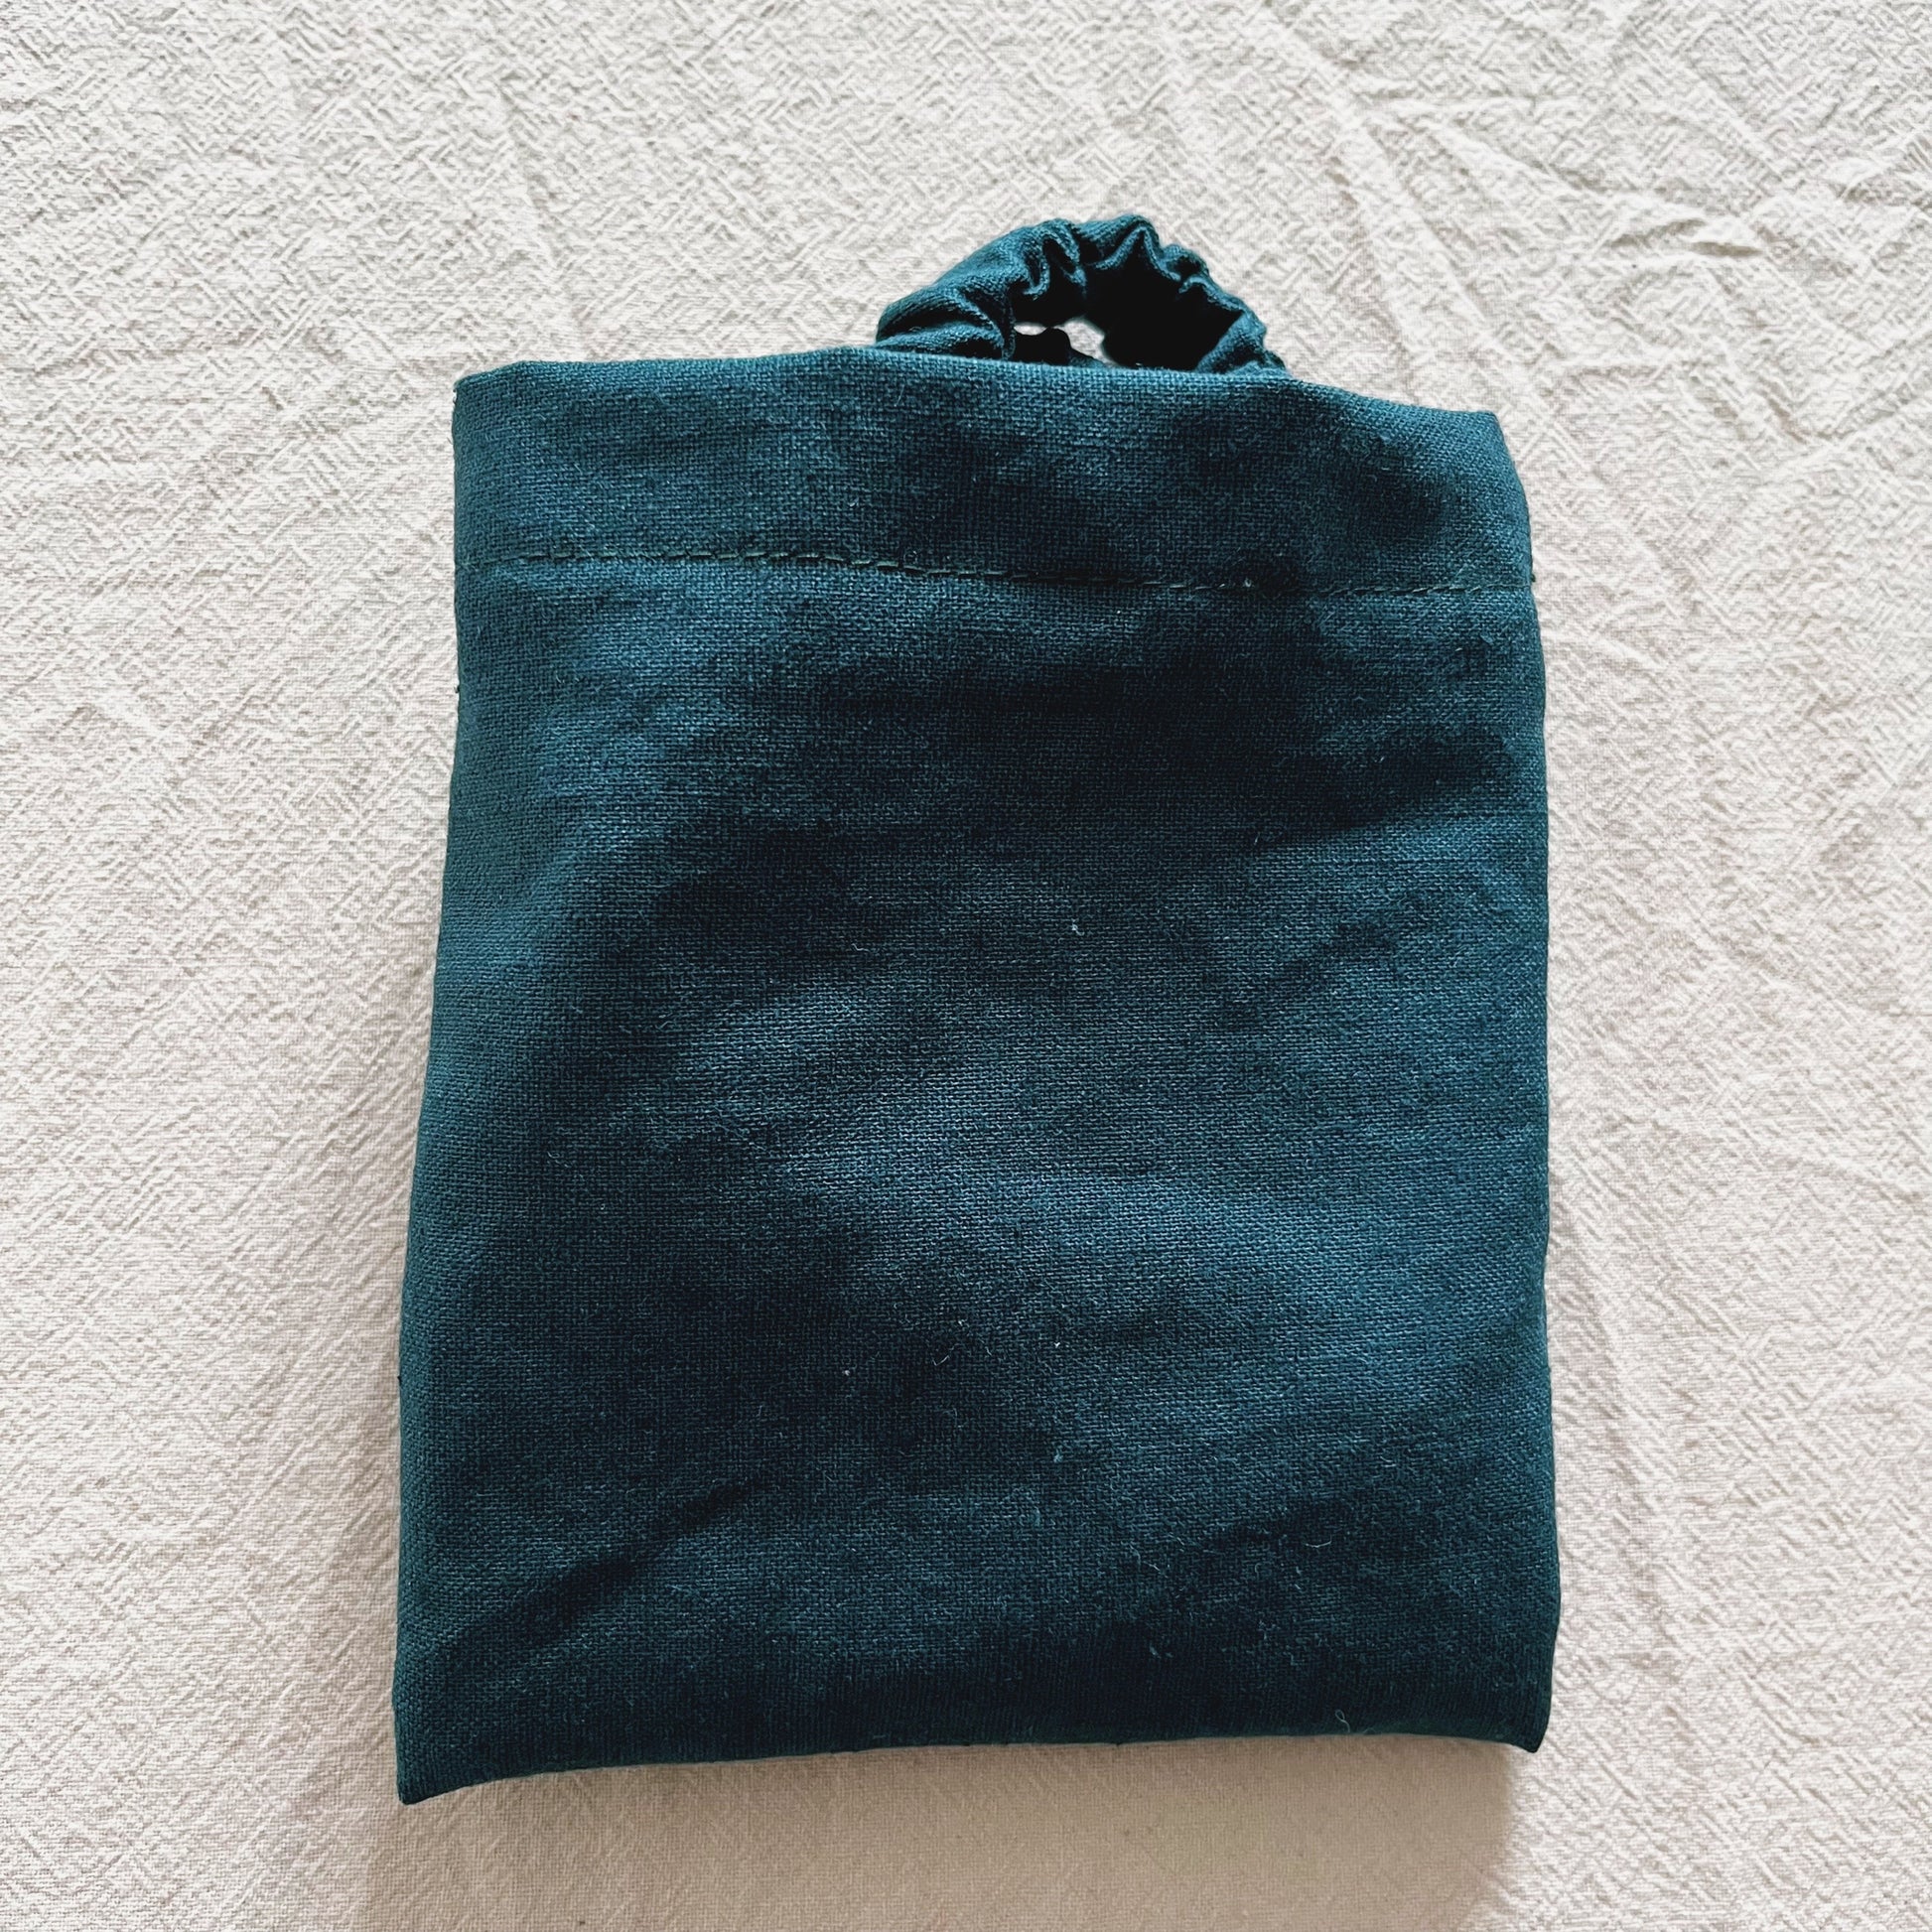 Washed linen sleep mask with keeper pouch -Teal Green - Walker & Walker